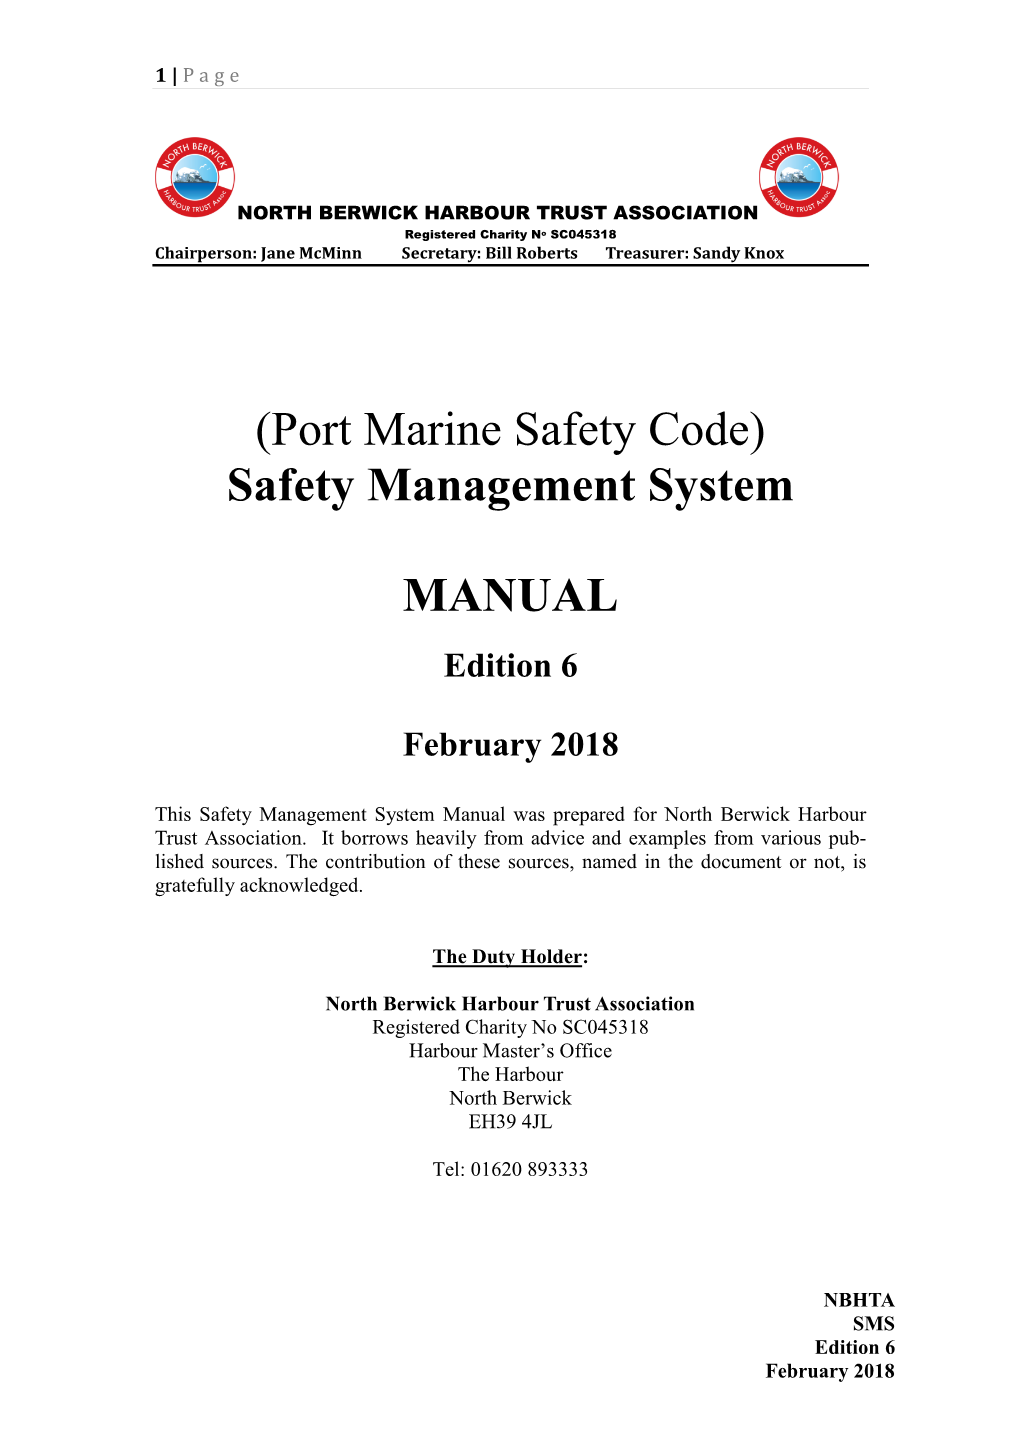 Safety Management System Manual Was Prepared for North Berwick Harbour Trust Association